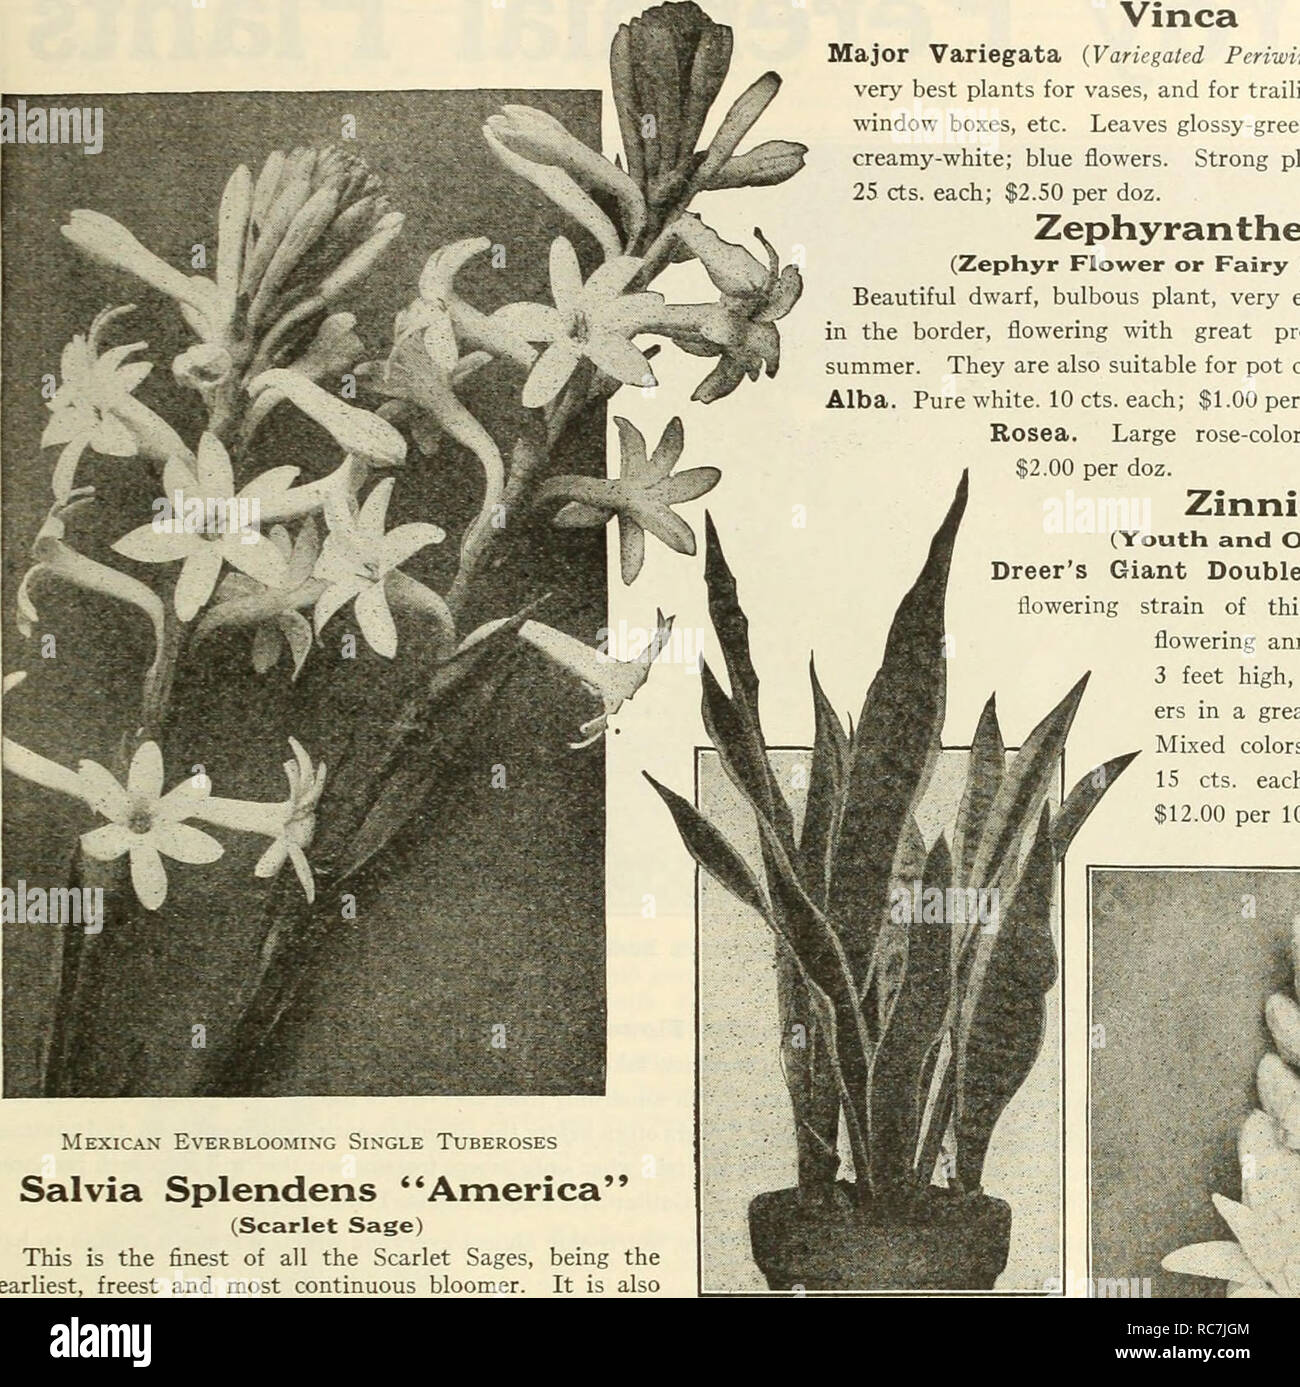 . Dreer's garden book 1925. Seeds Catalogs; Nursery stock Catalogs; Gardening Equipment and supplies Catalogs; Flowers Seeds Catalogs; Vegetables Seeds Catalogs; Fruit Seeds Catalogs. (flEHRyA-DREEH^ .garden™&quot; greenhouse PLANT.S jTPHlLMmMlk^ 167. Vinca Major Variegata {Variegated Periwinkle). One of the very best plants for vases, and for trailing over the edges of window boxes, etc. Leaves glossy-green, broadly margined creamy-white; blue flowers. Strong plants in 4-inch pots, 25 cts. each; $2.50 per doz. Zephyranthes (Zephyr Flower or Fairy Lilies) Beautiful dwarf, bulbous plant, very e Stock Photo